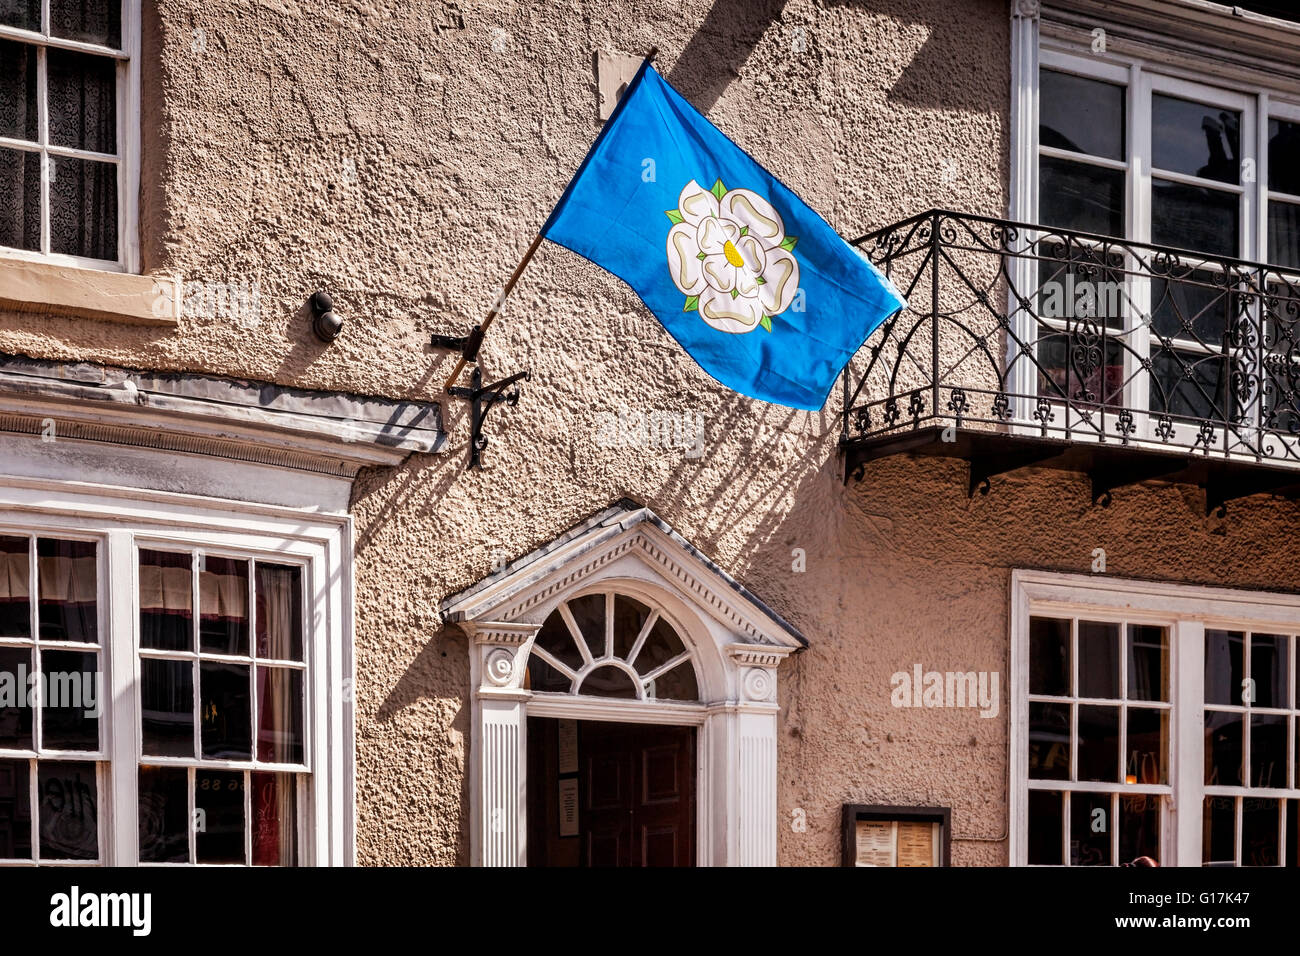 Building in the High Street in Knaresborough, North Yorkshire, flying the White Rose flag of Yorkshire, England, UK Stock Photo